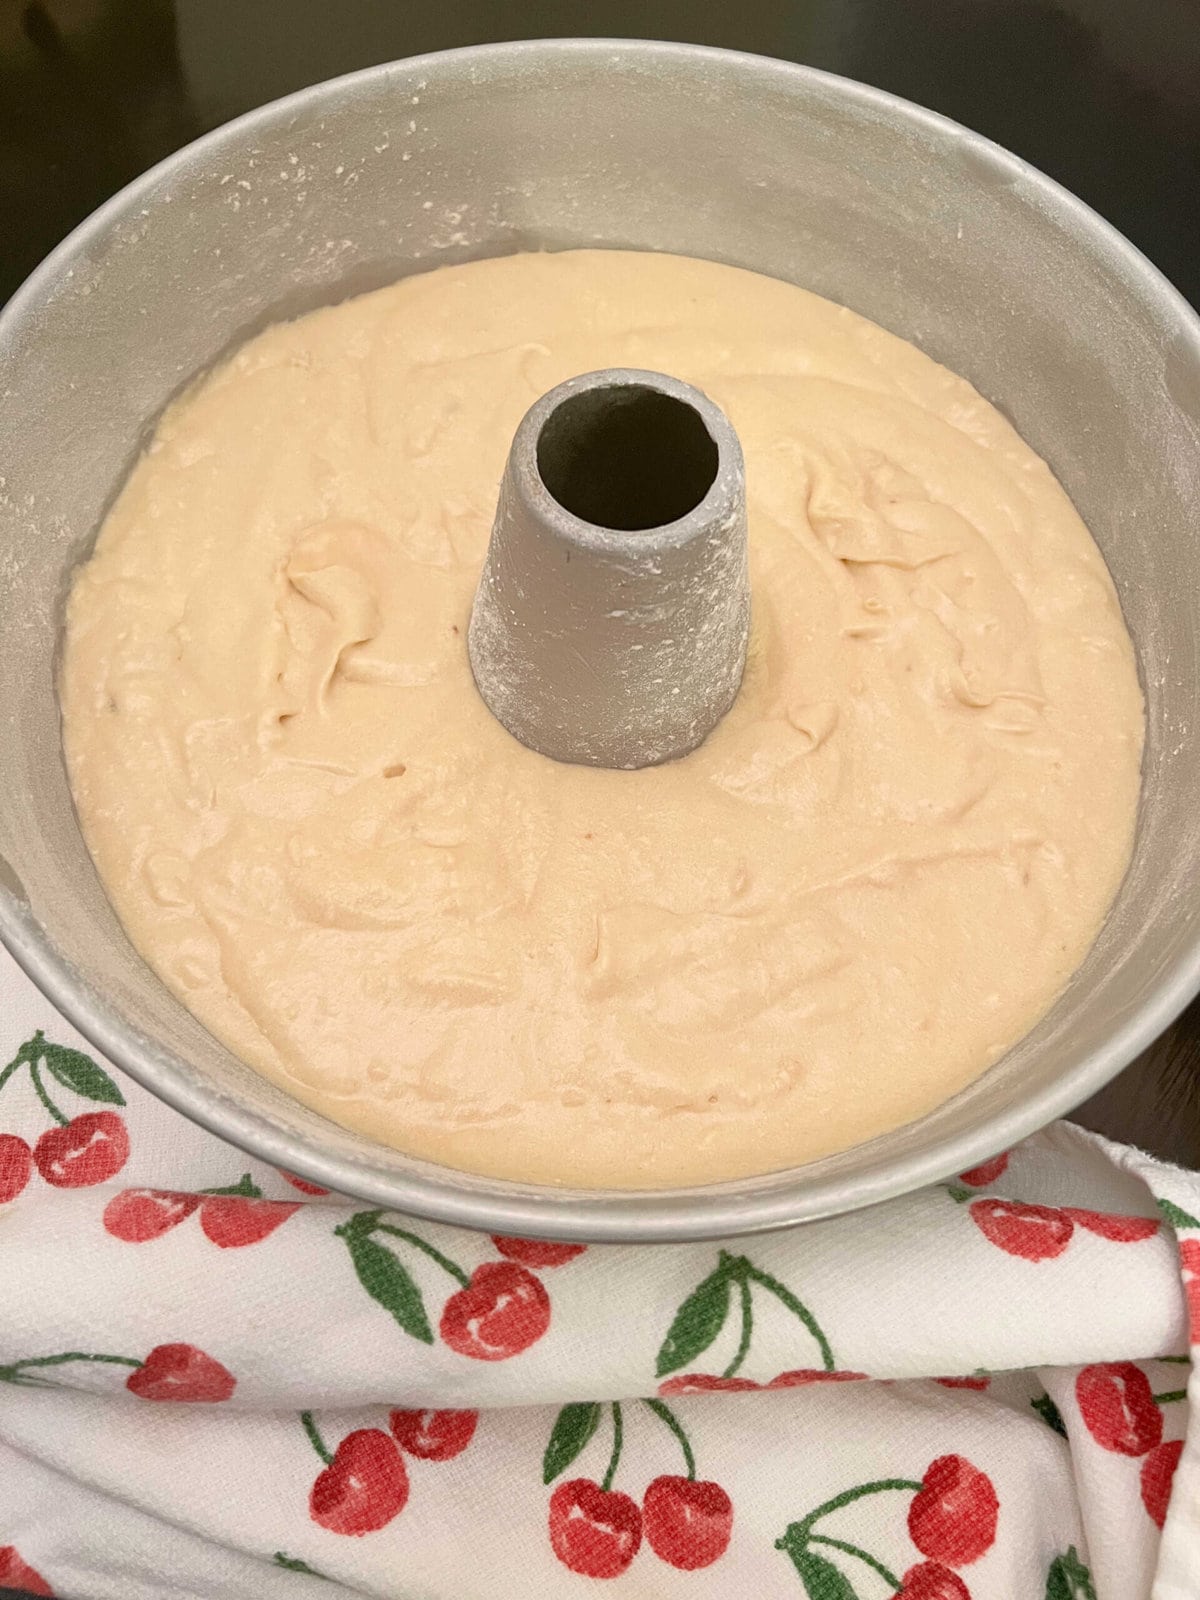 Tube pan filled with maple pound cake batter.